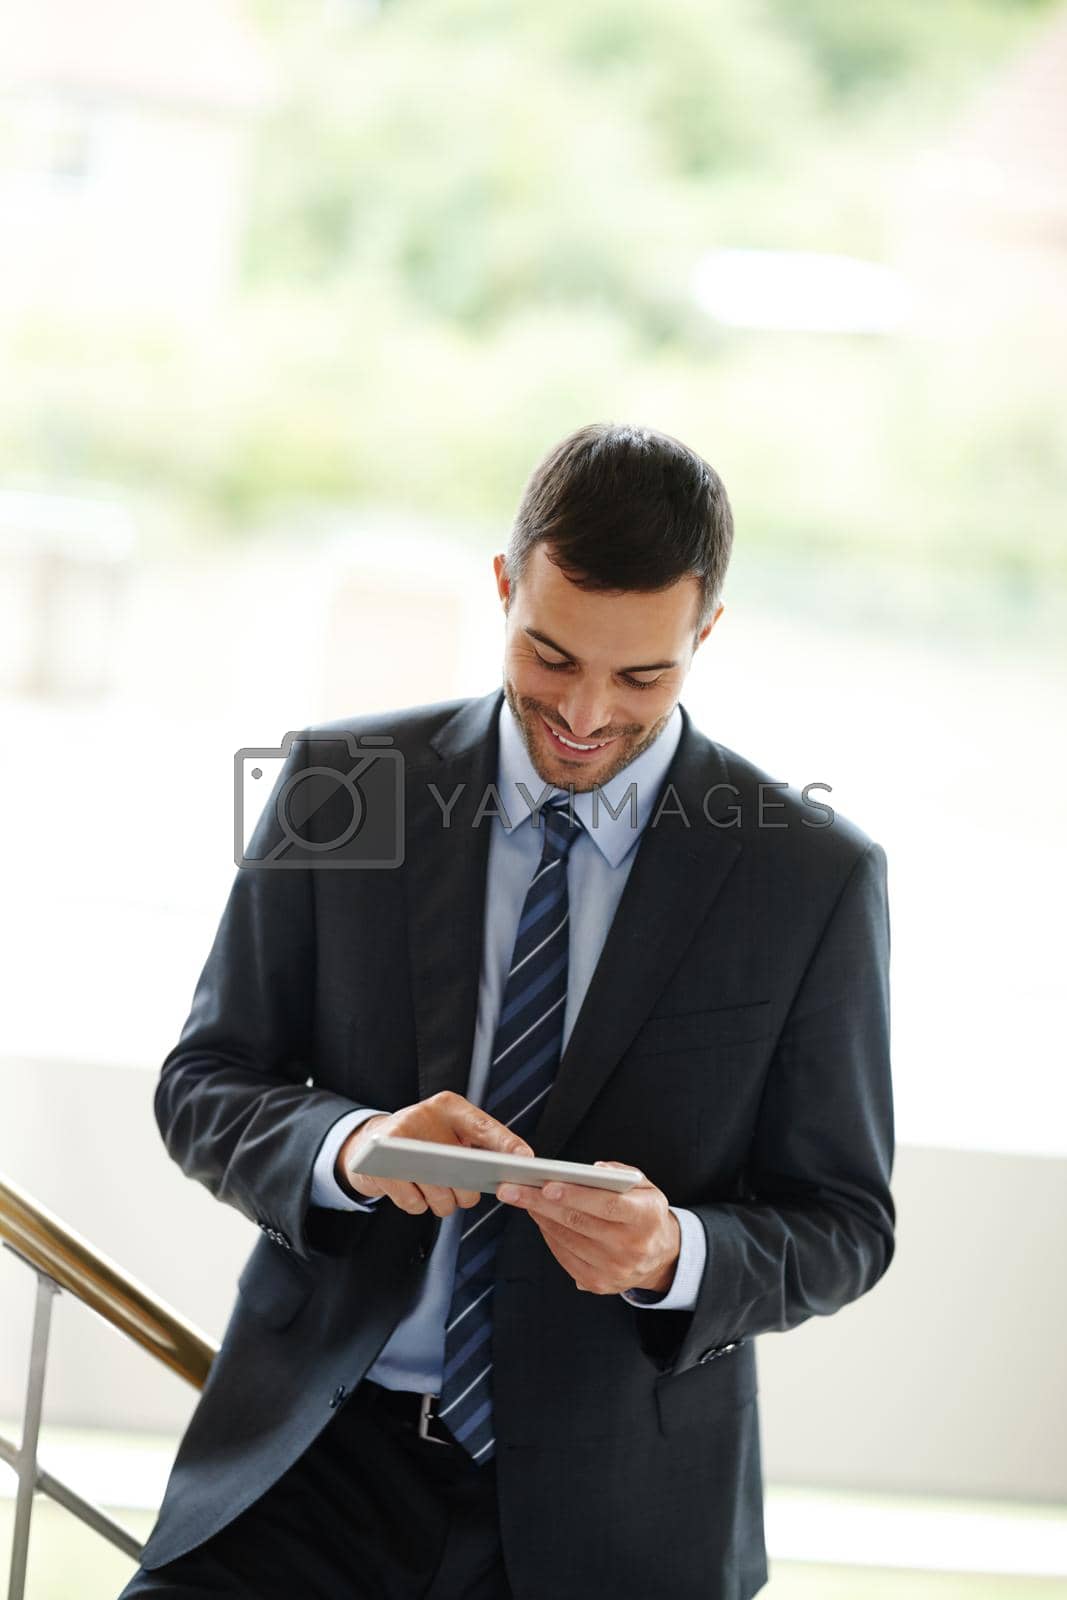 Royalty free image of I cant believe how simple this is. A handsome young businessman using a digital tablet while standing indoors. by YuriArcurs